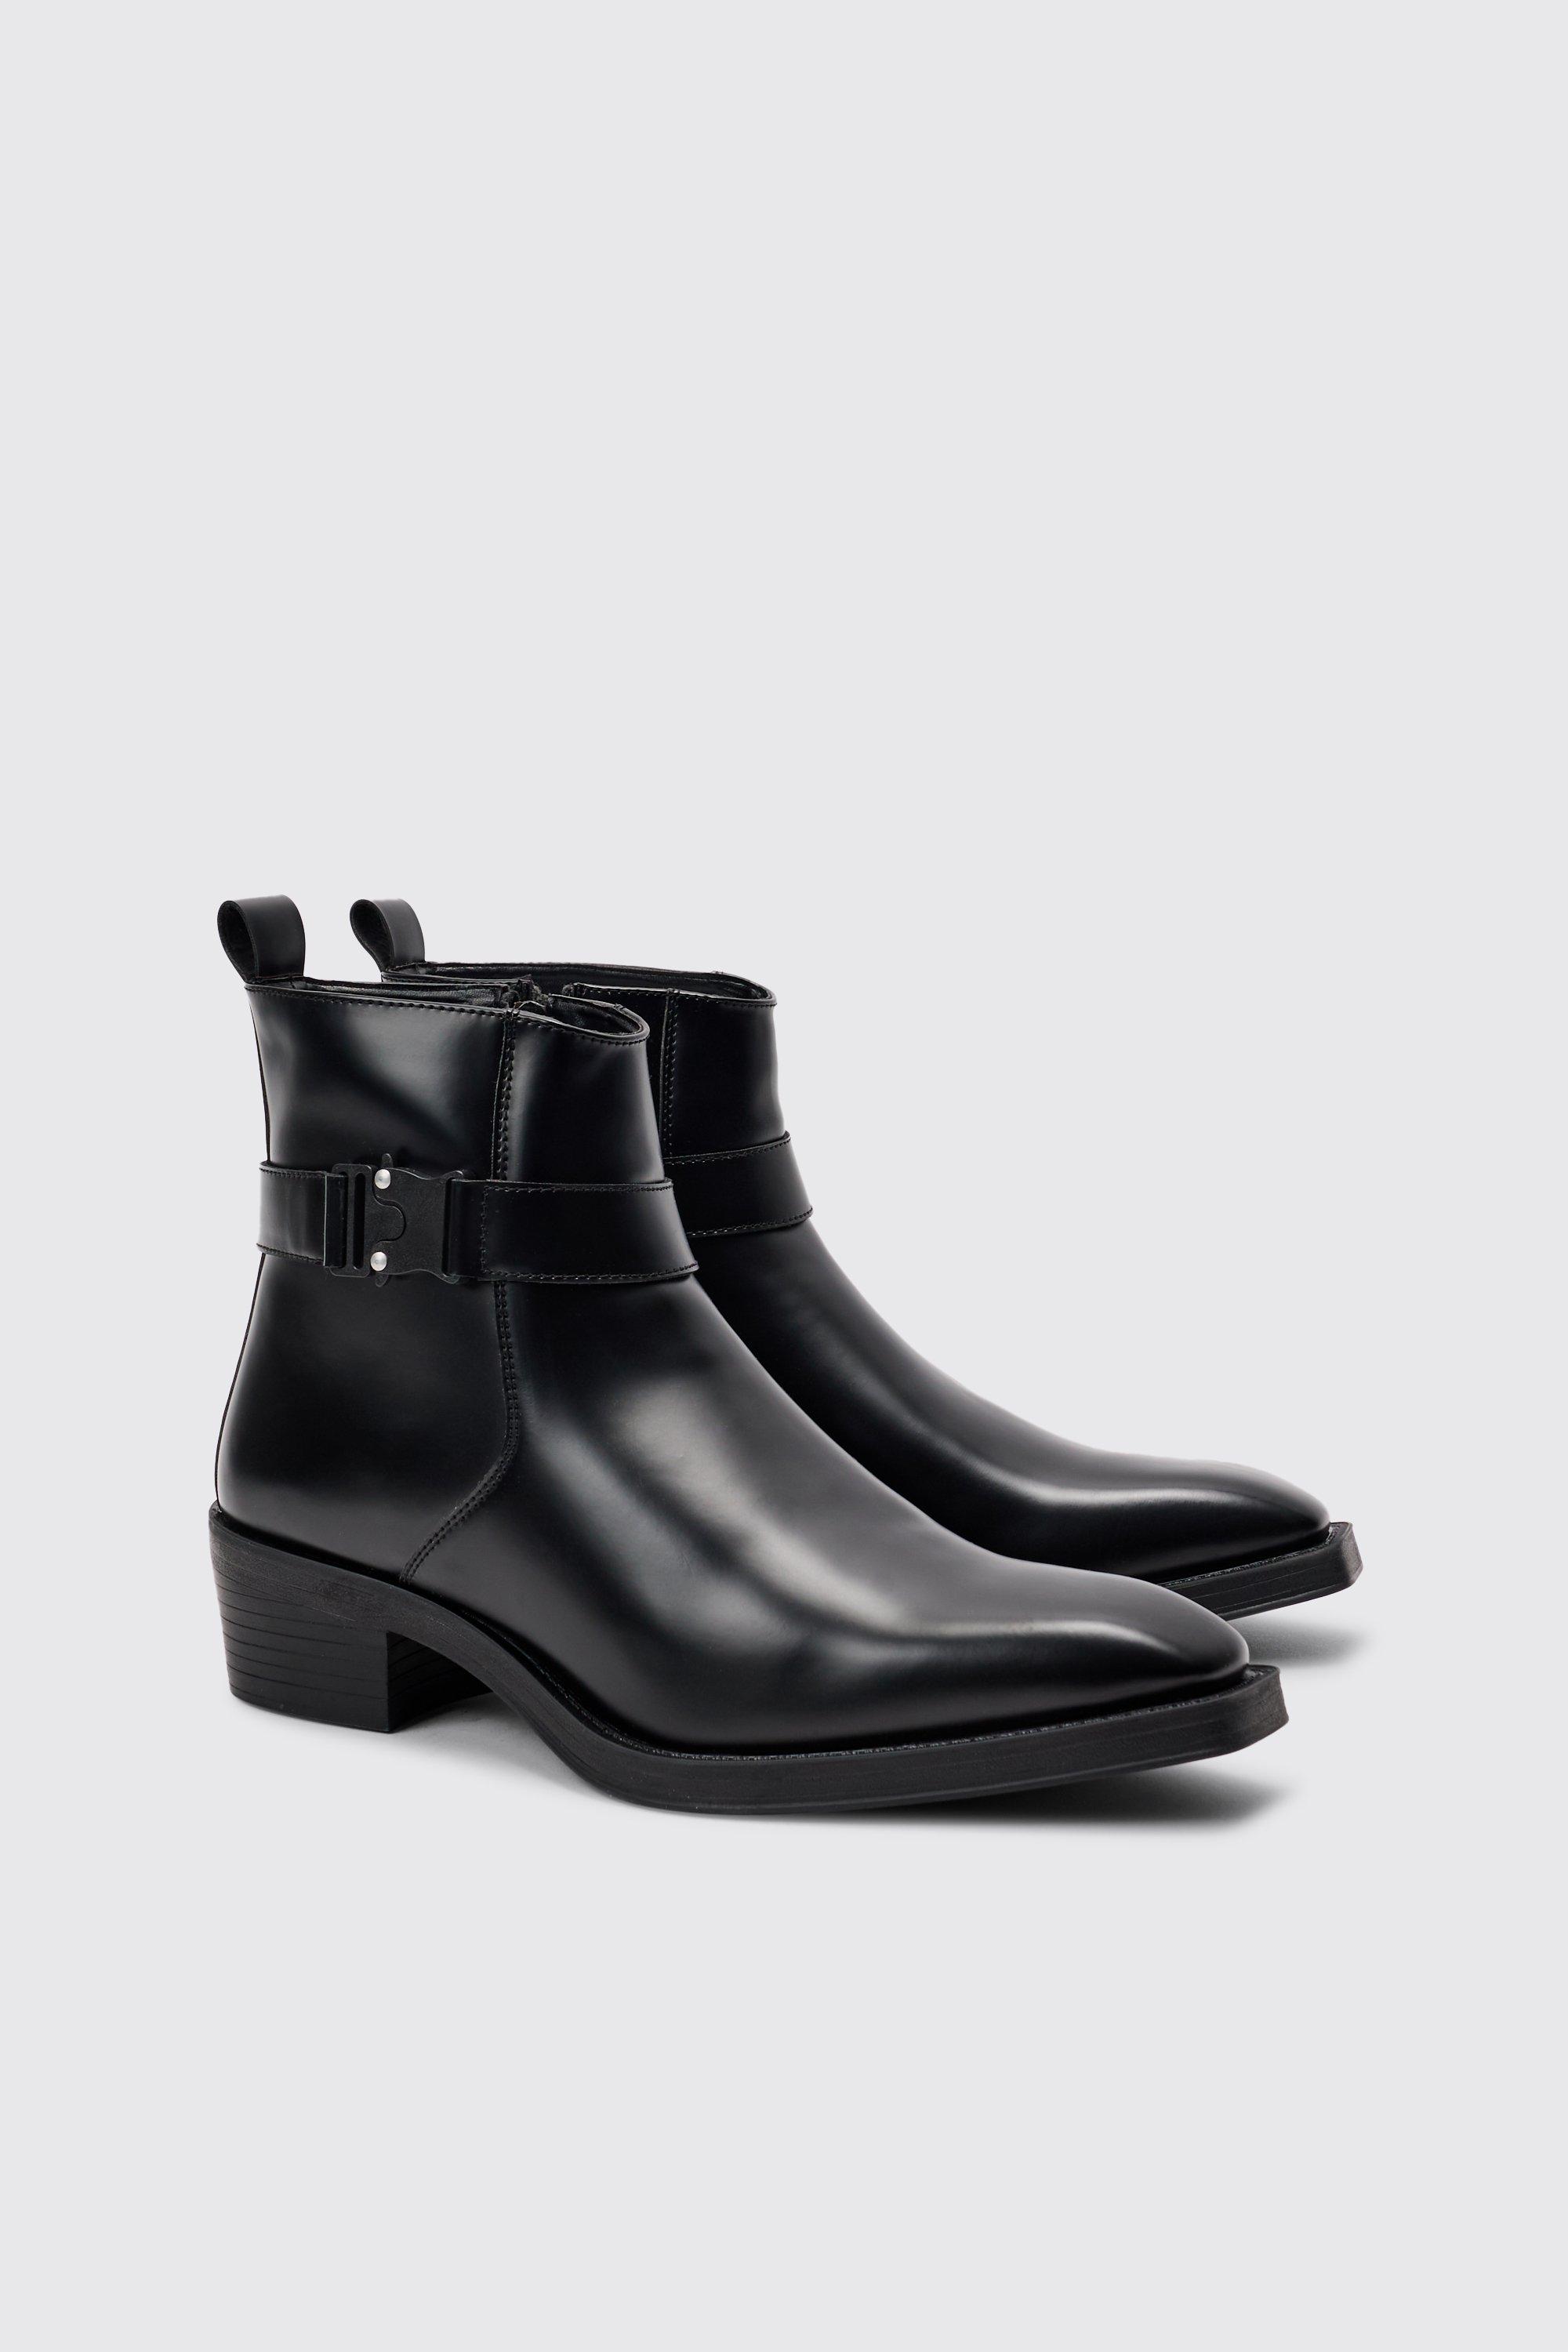 Image of Pu Square Toe Buckle Detail Boot In Black, Nero